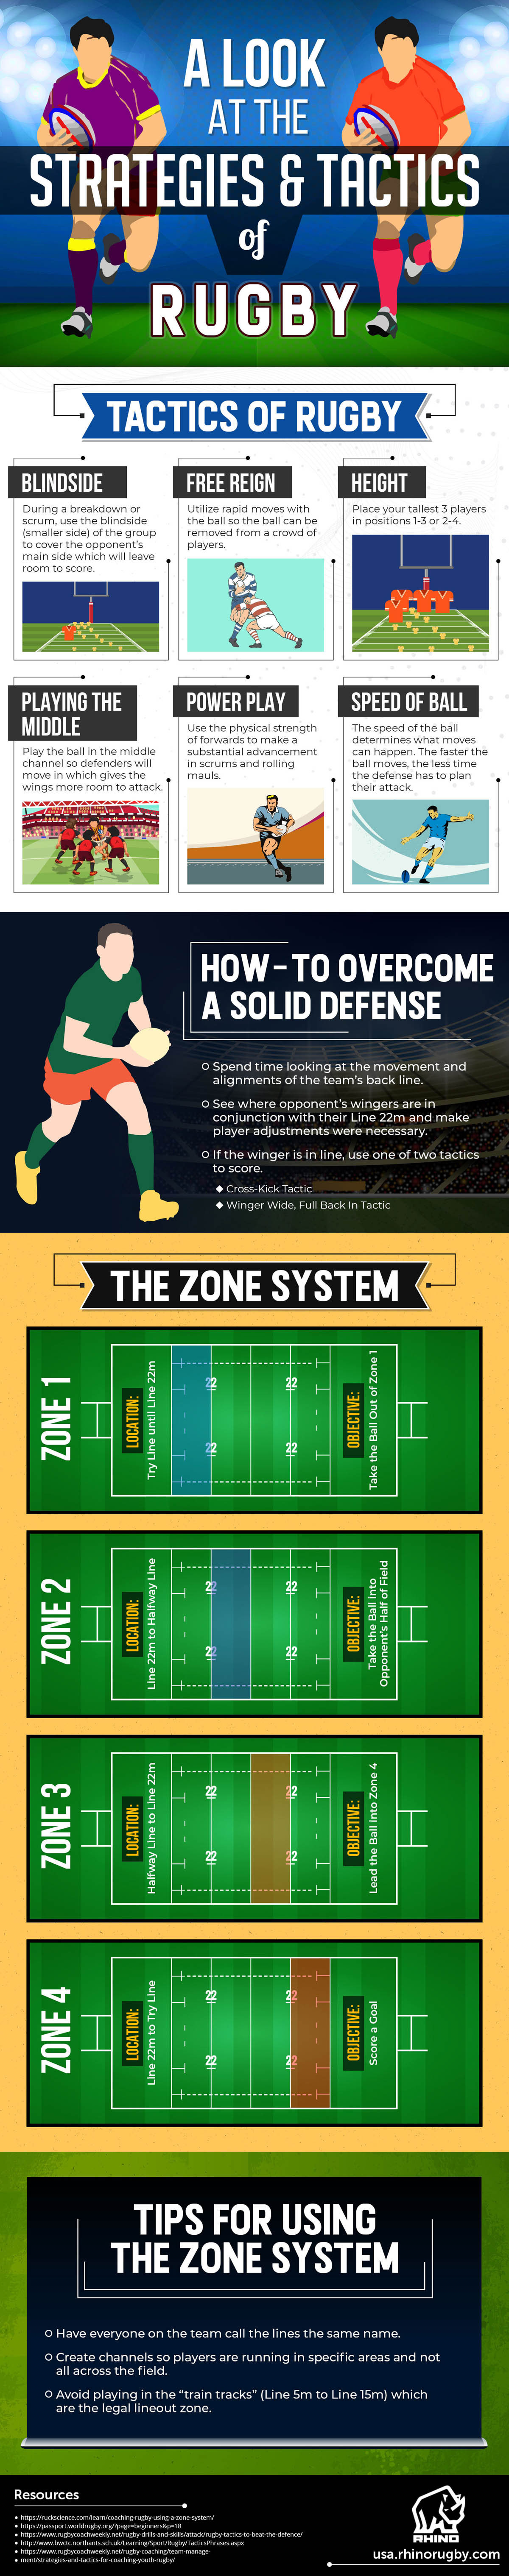 A Look at the Strategies and Tactics of Rugby